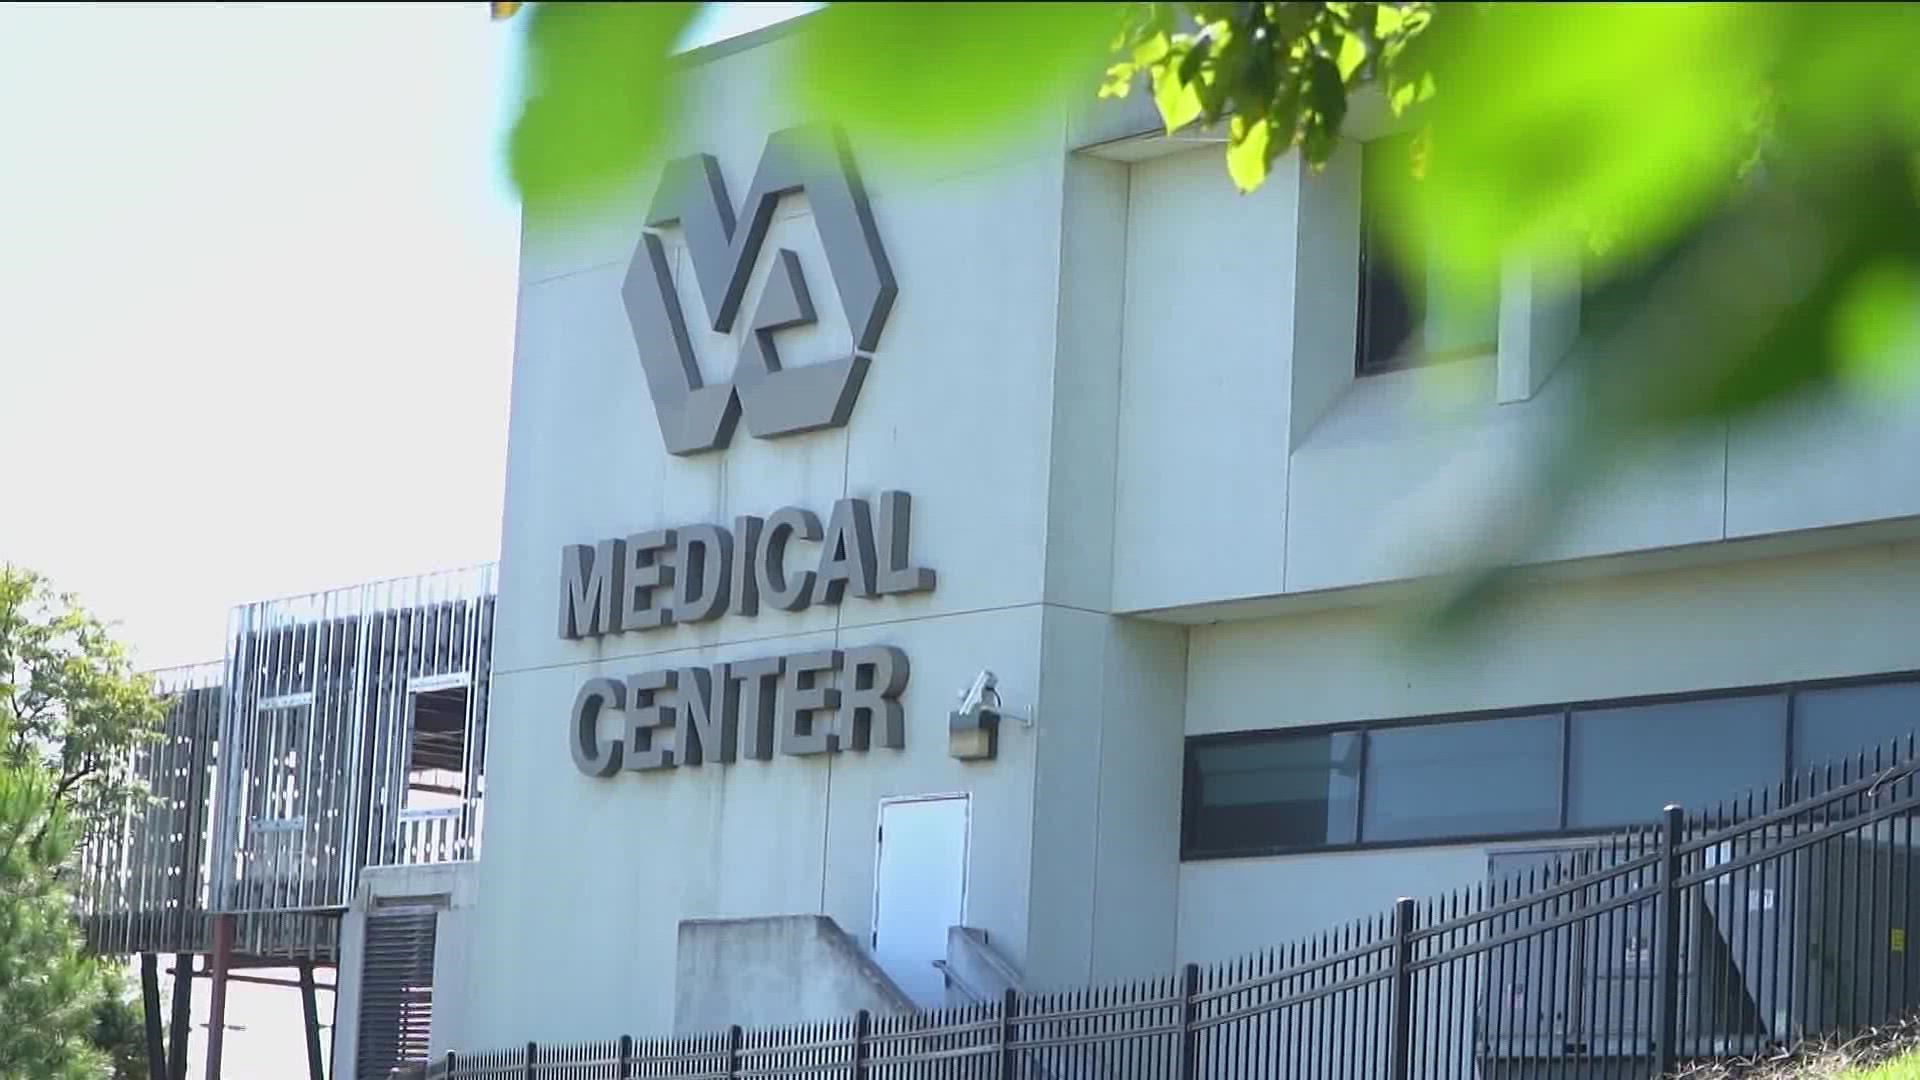 An 11Alive investigation found veterans in Georgia are waiting months for critical health care.